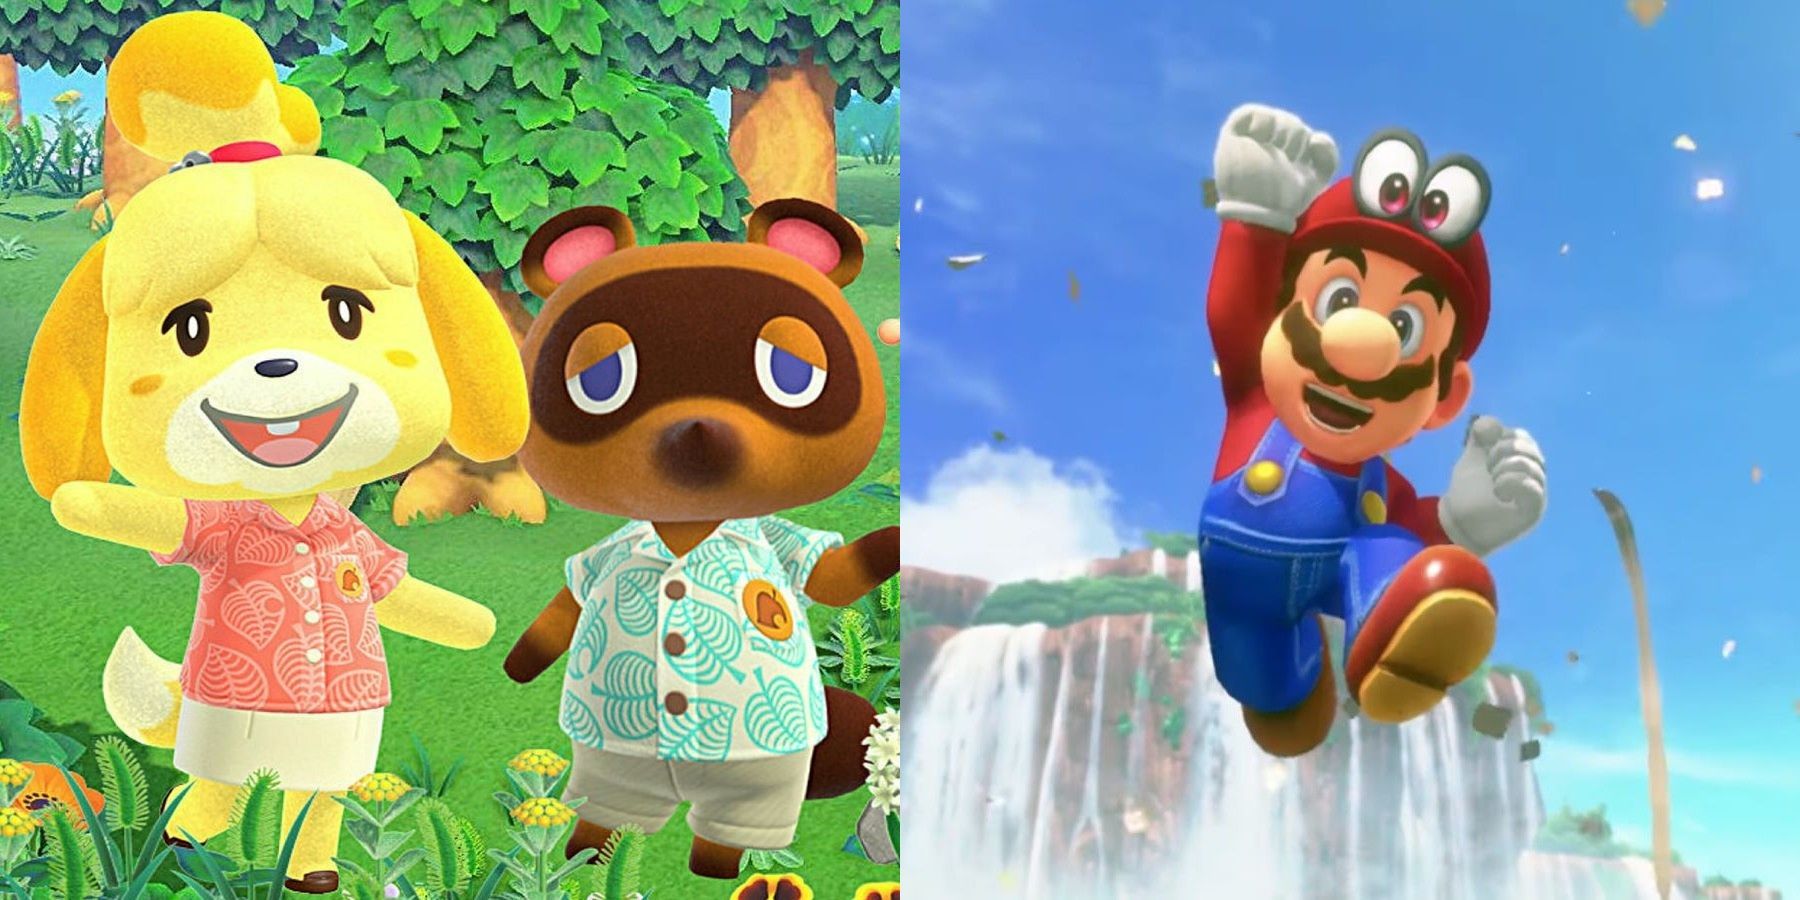 Isabelle and Tom Nook from Animal Crossing: New Horizons next to Mario in Super Mario Odyssey